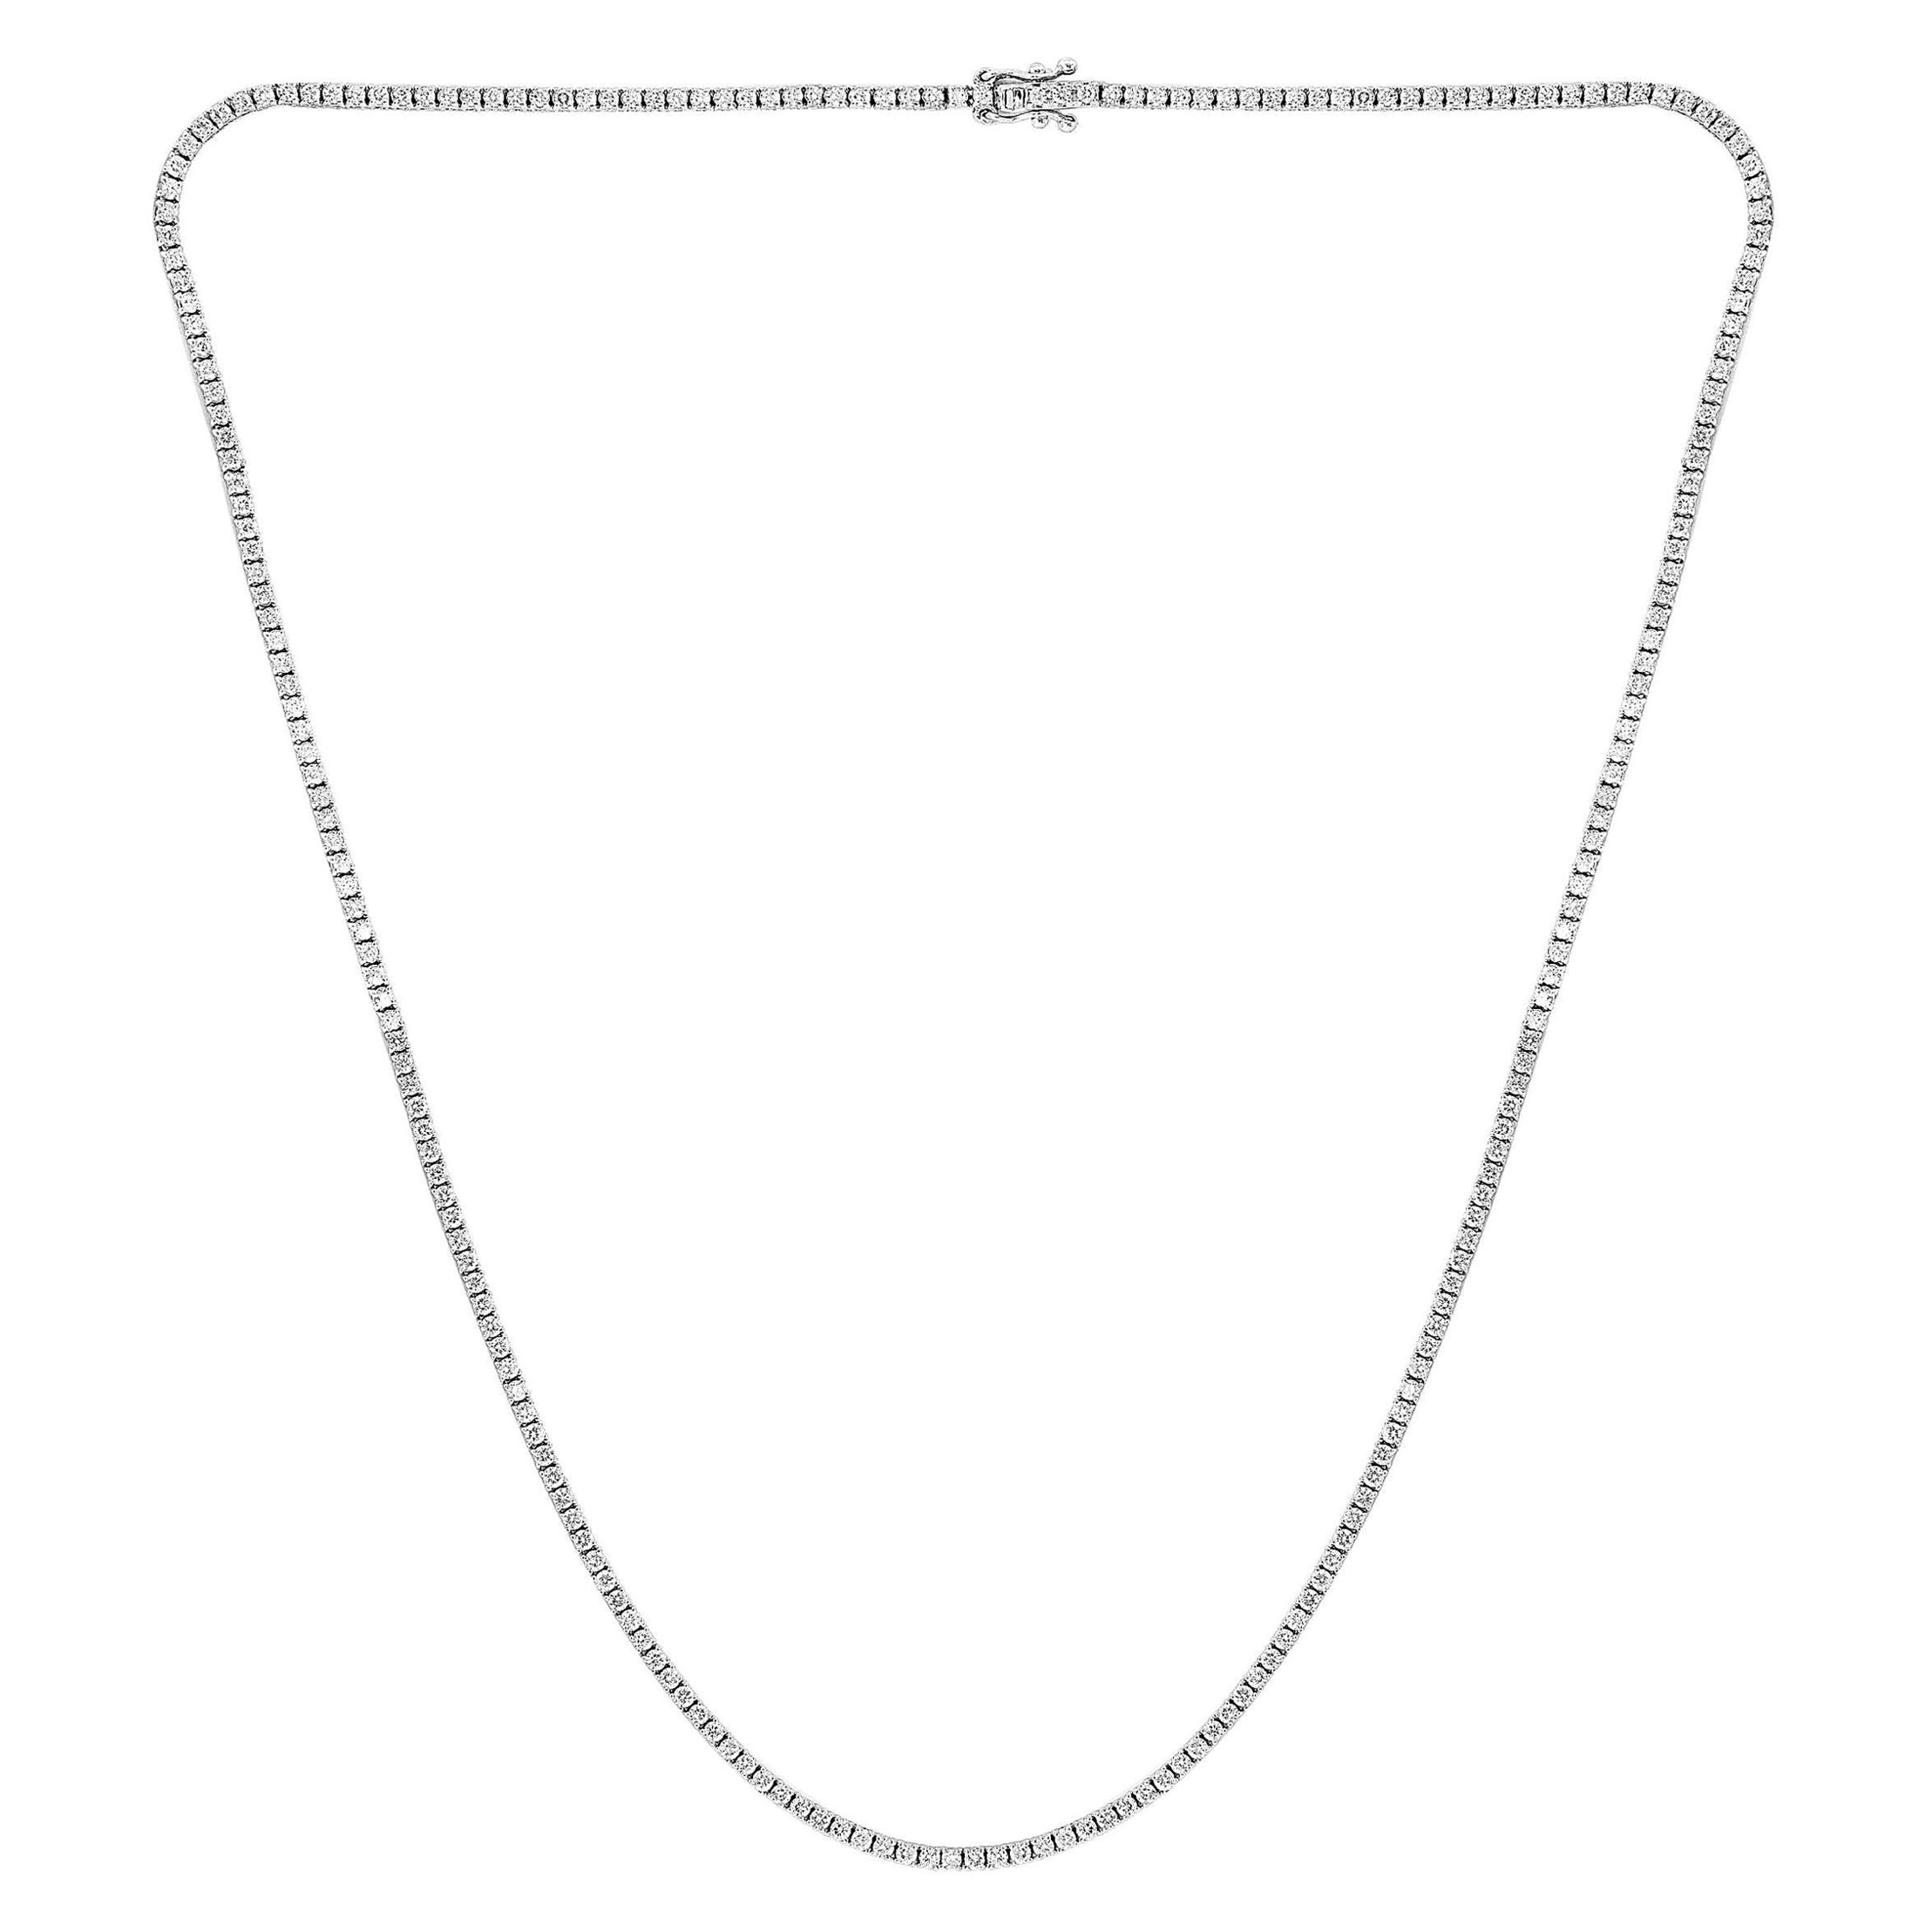 3.01 Carat Diamond Tennis Necklace in 14K White Gold For Sale